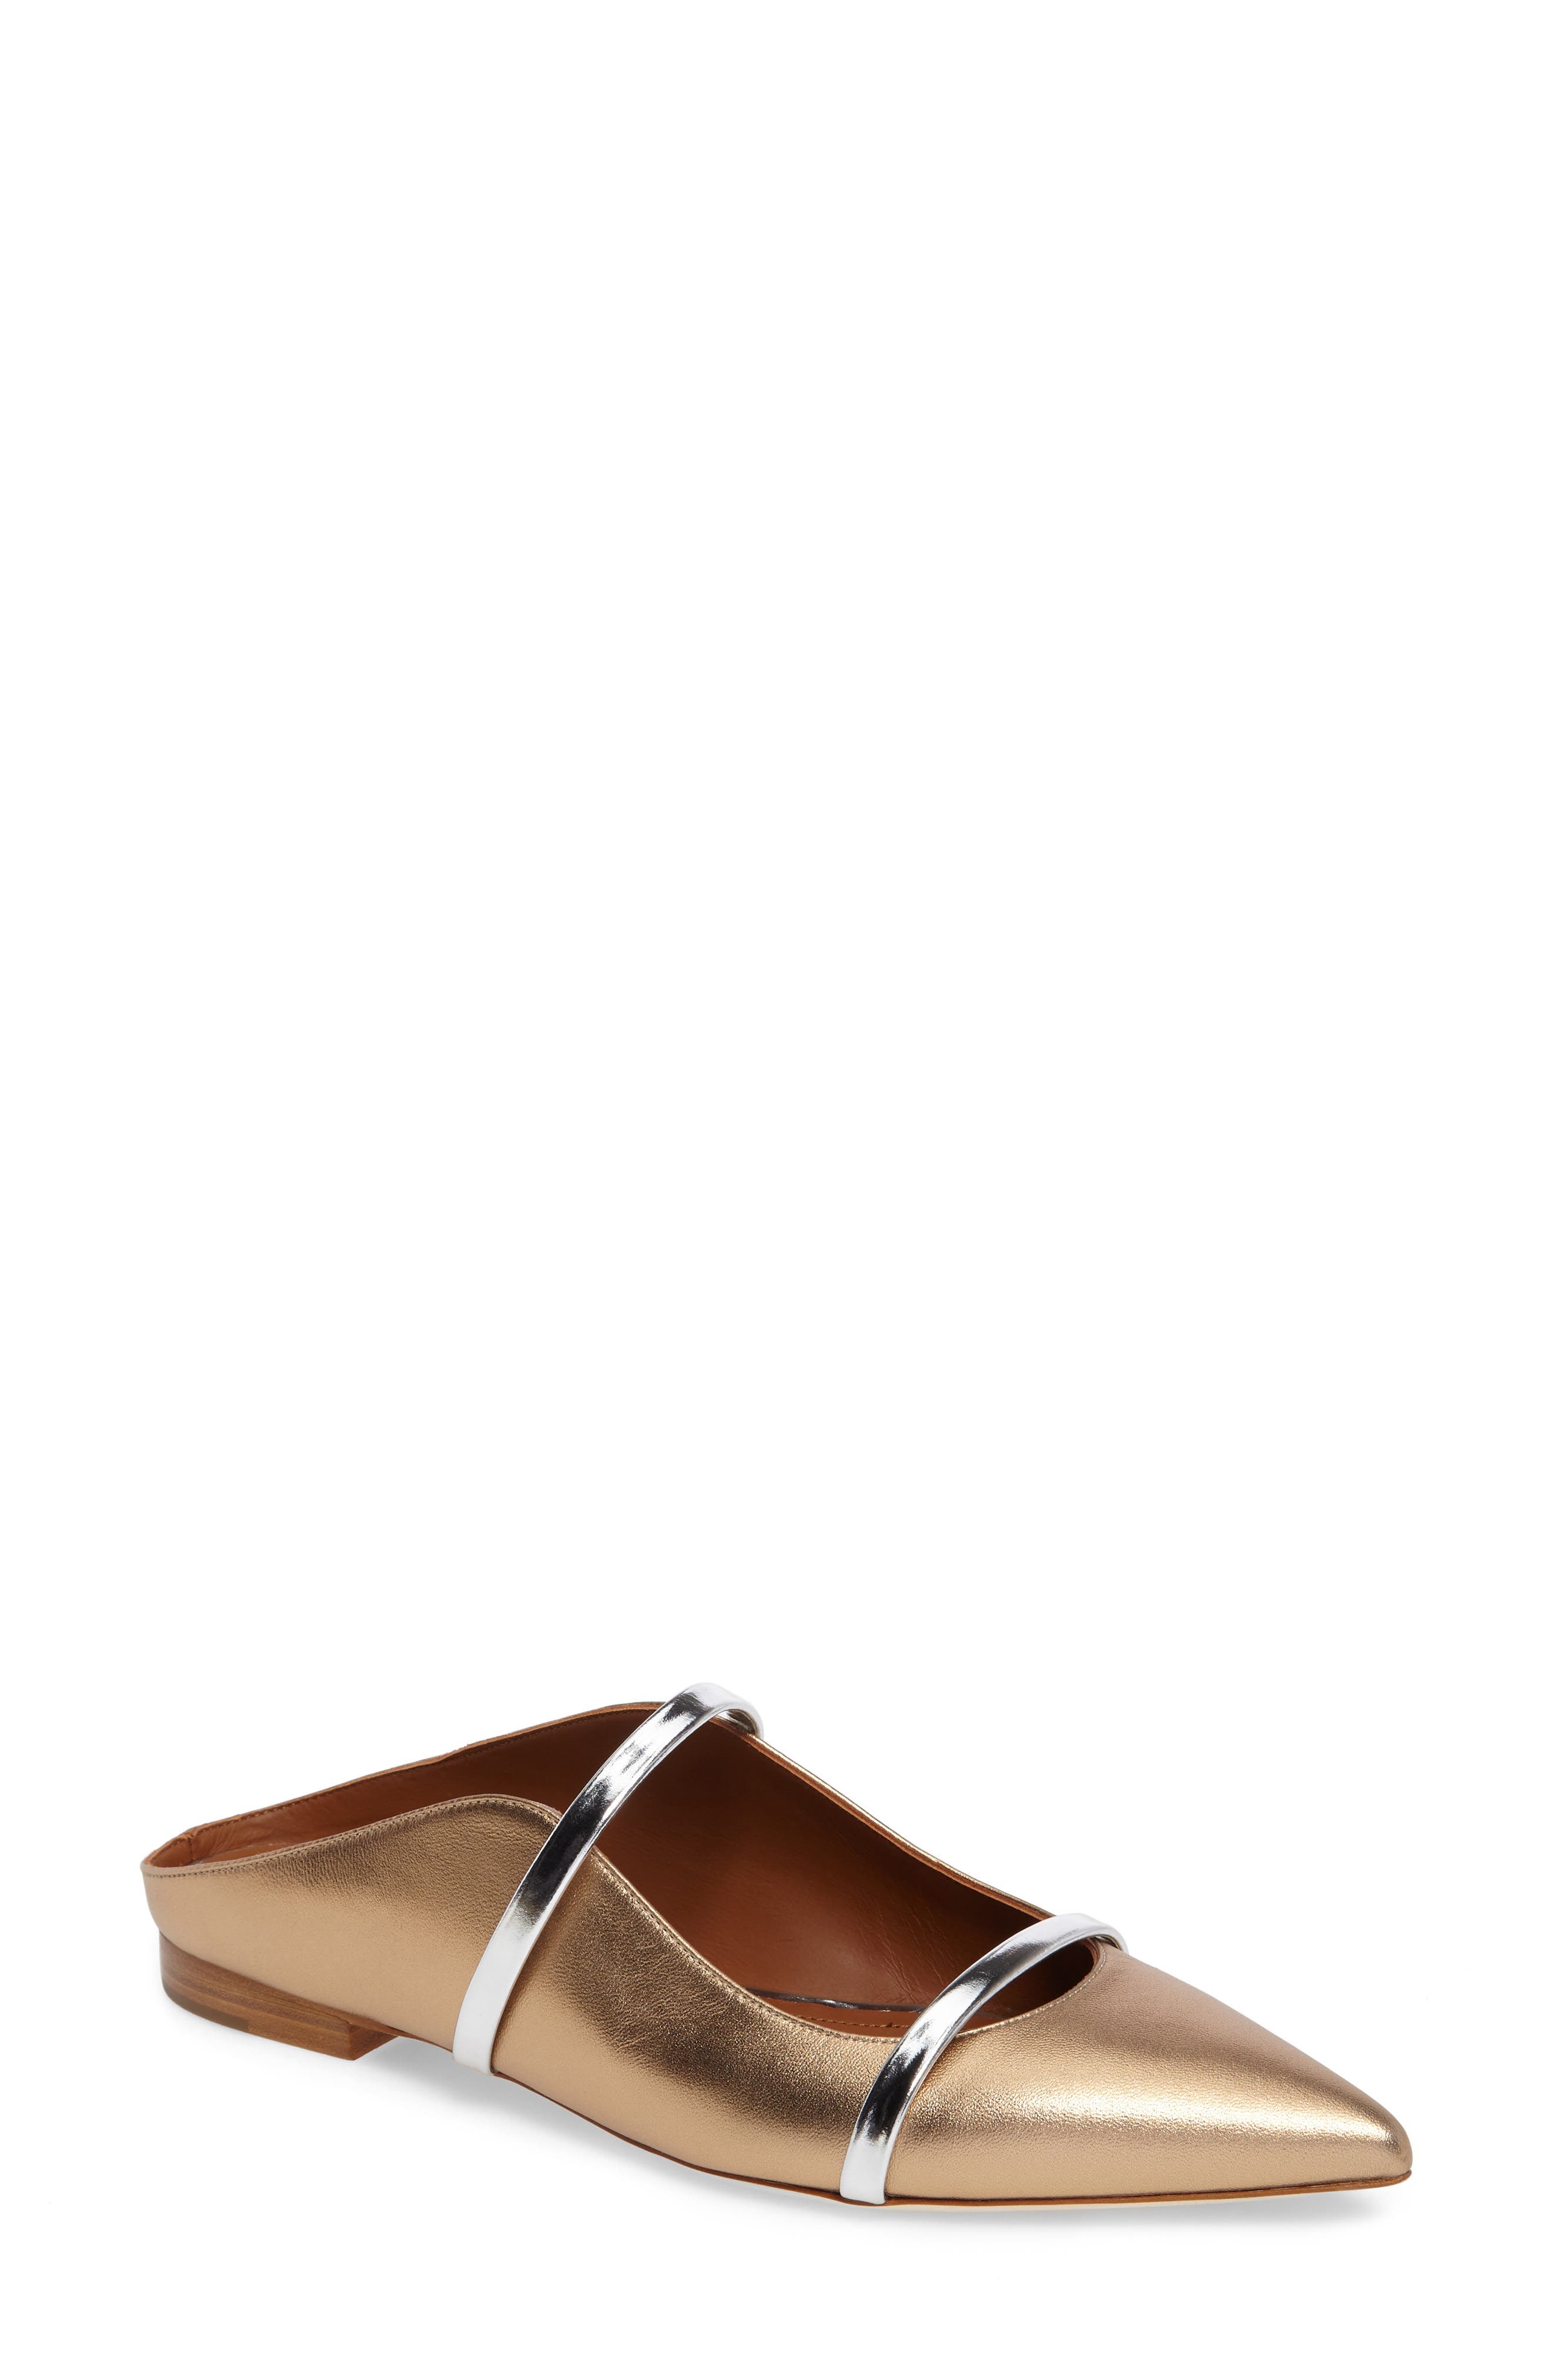 malone souliers nordstrom